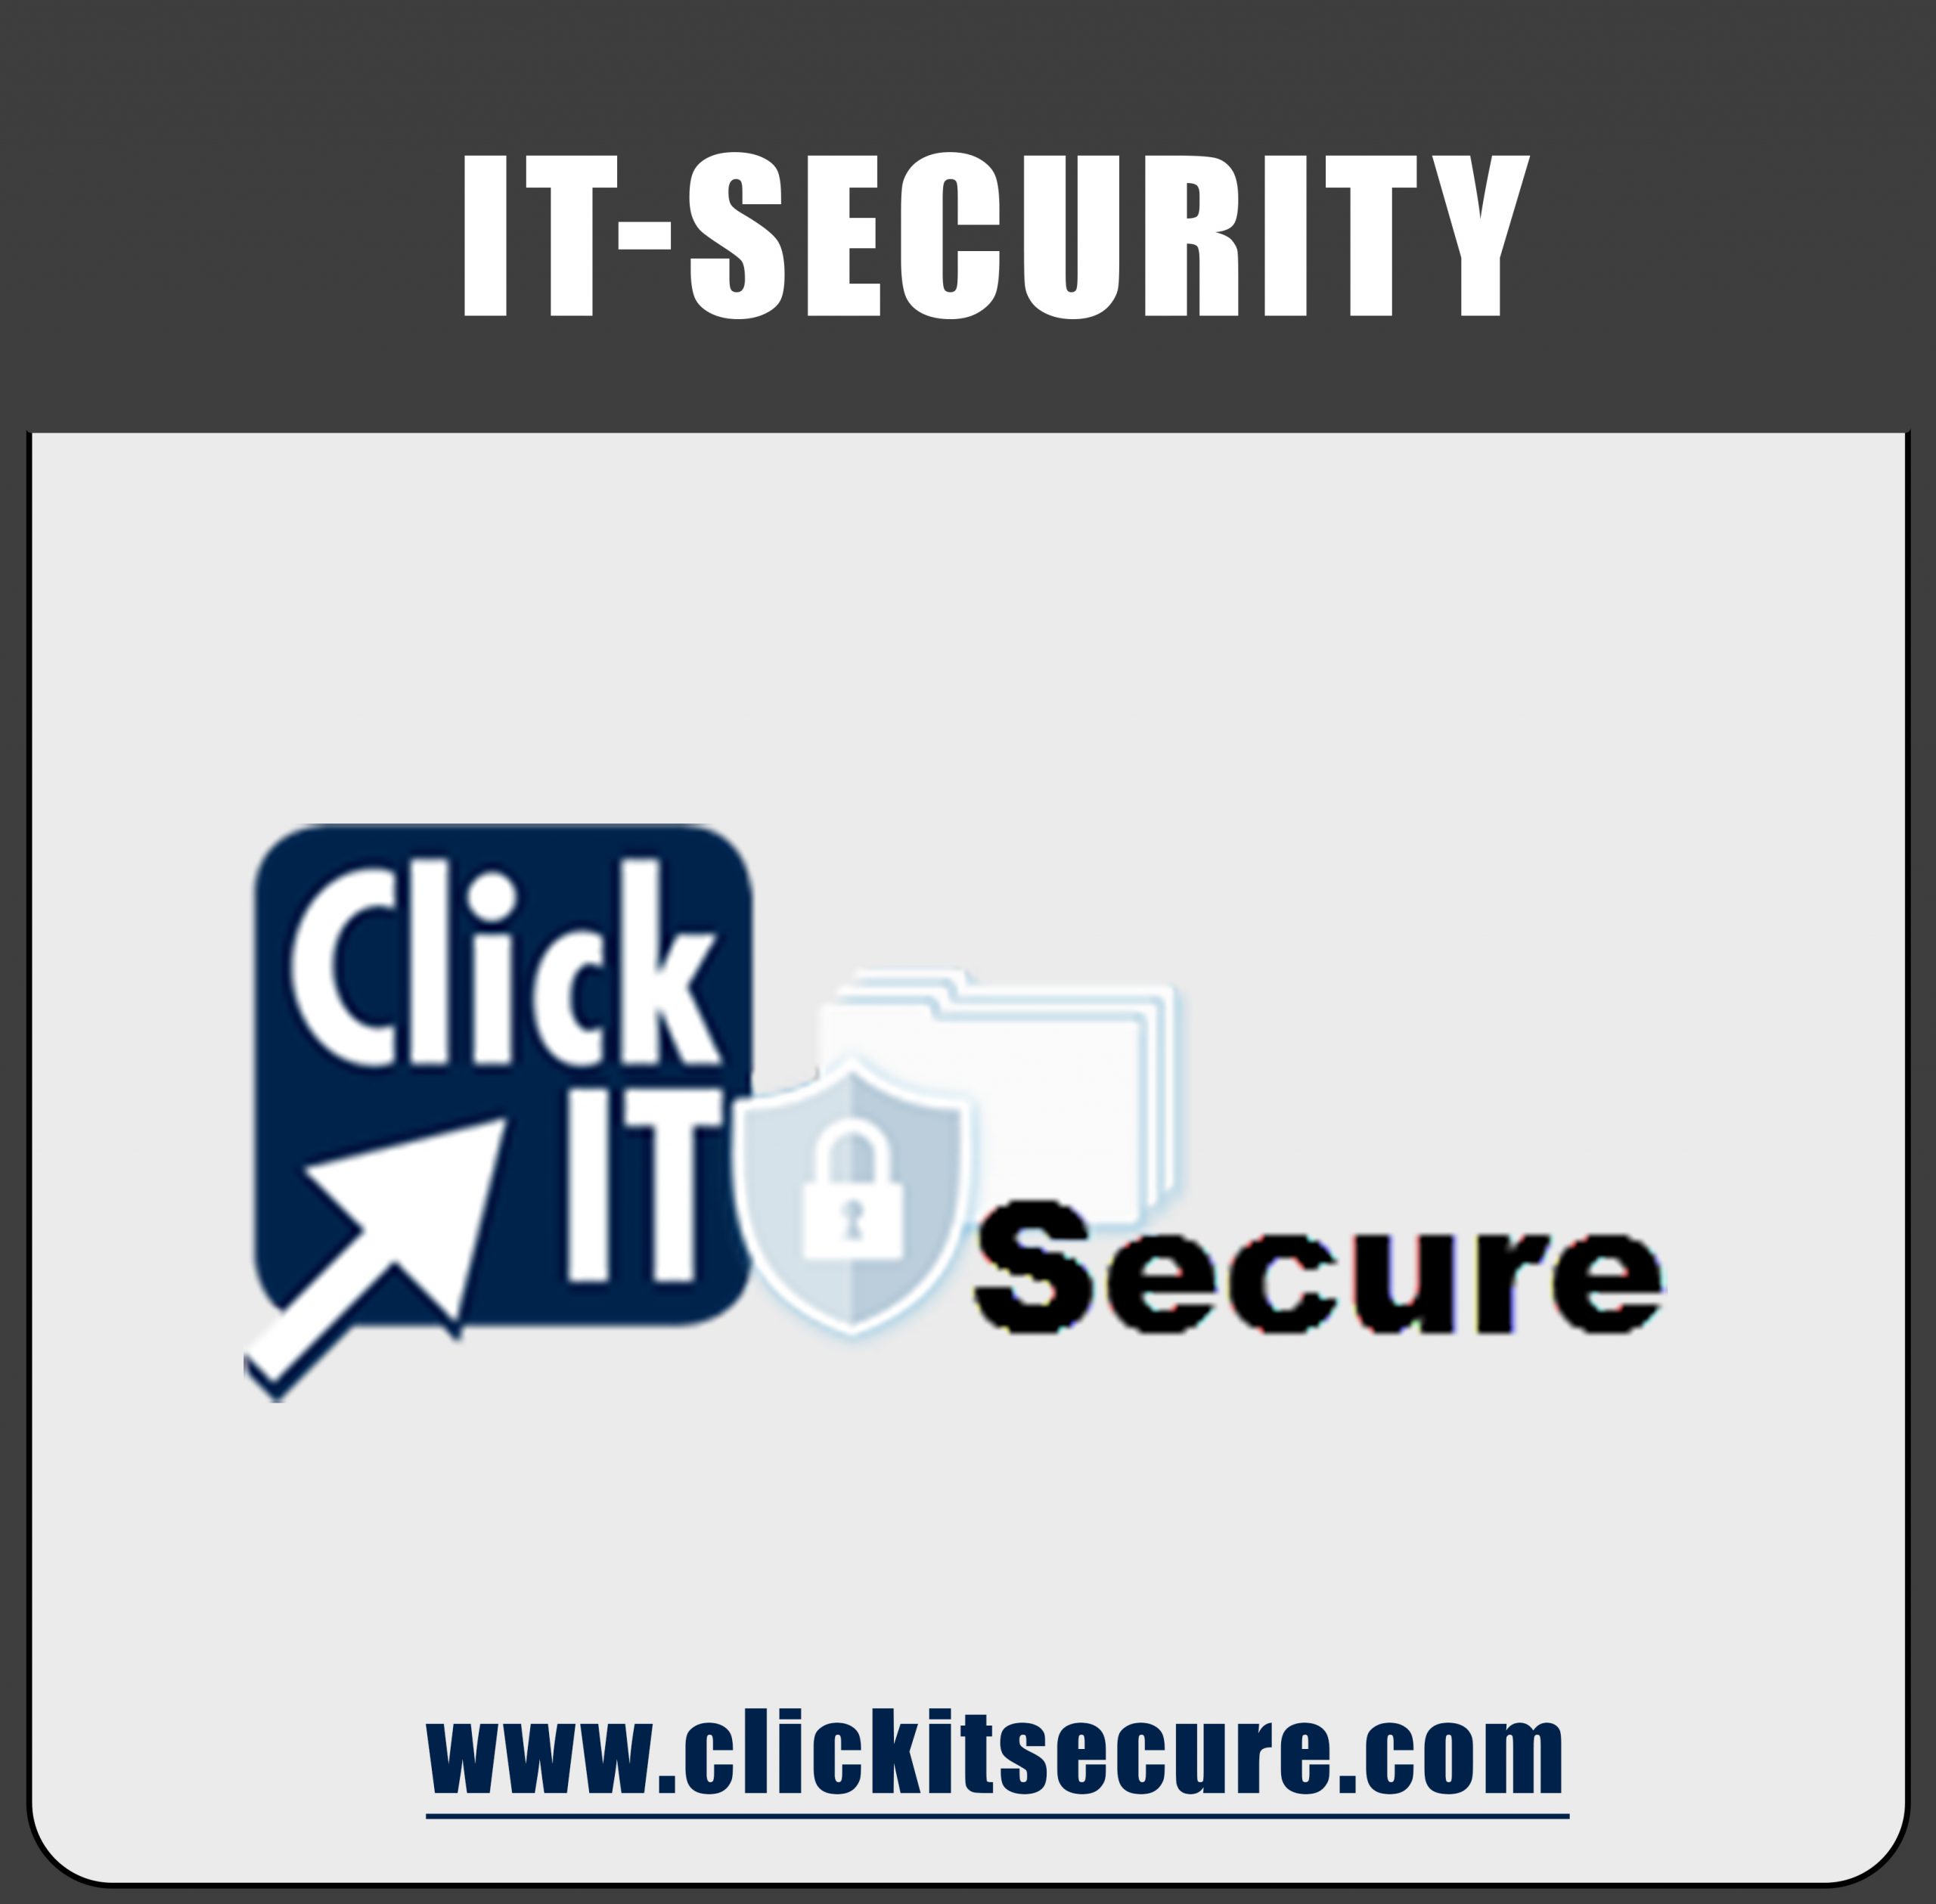 Click-IT-Secure-Category-scaled